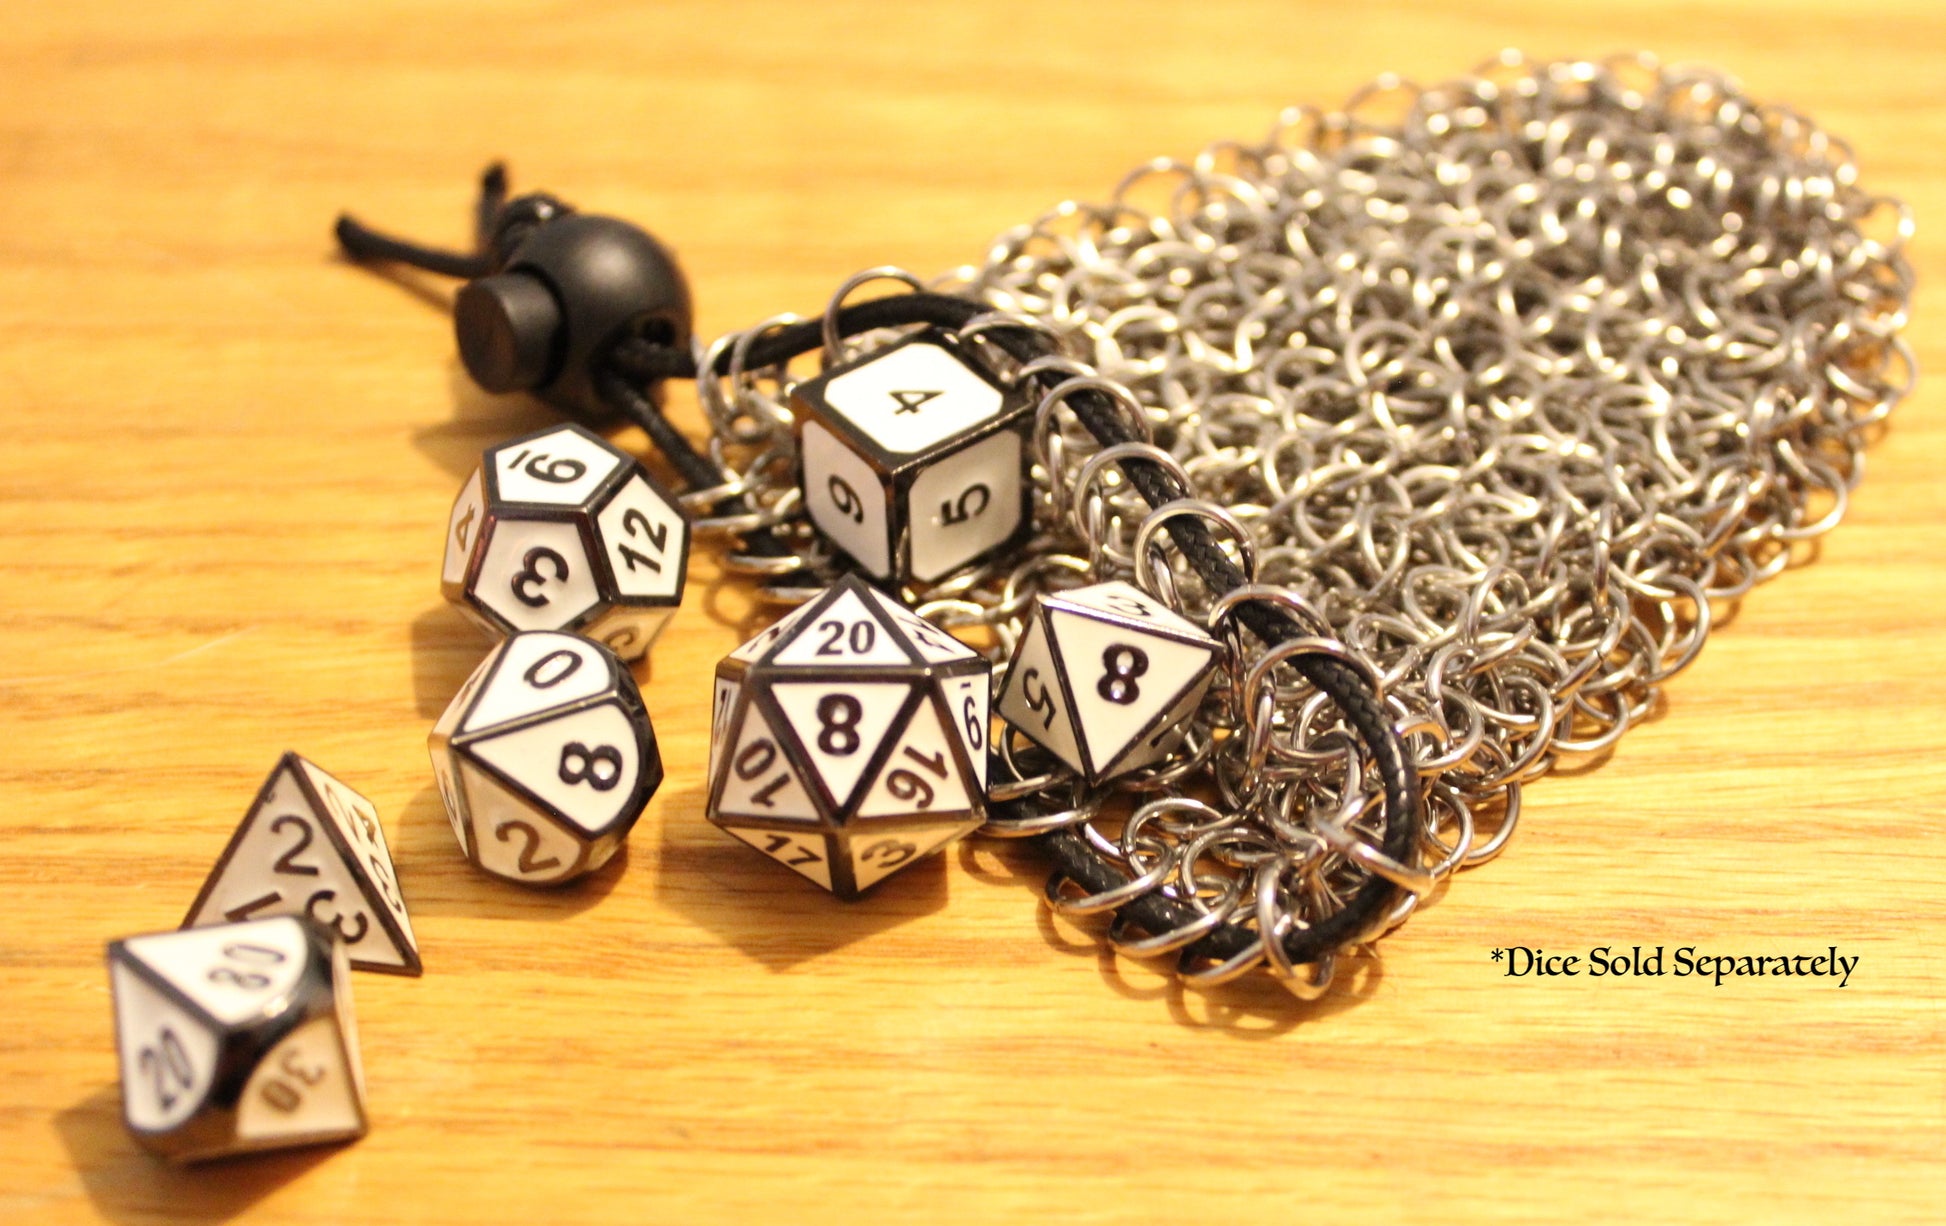 Chainmail RPG Dice Bag - Role Playing Game Dice Pouch